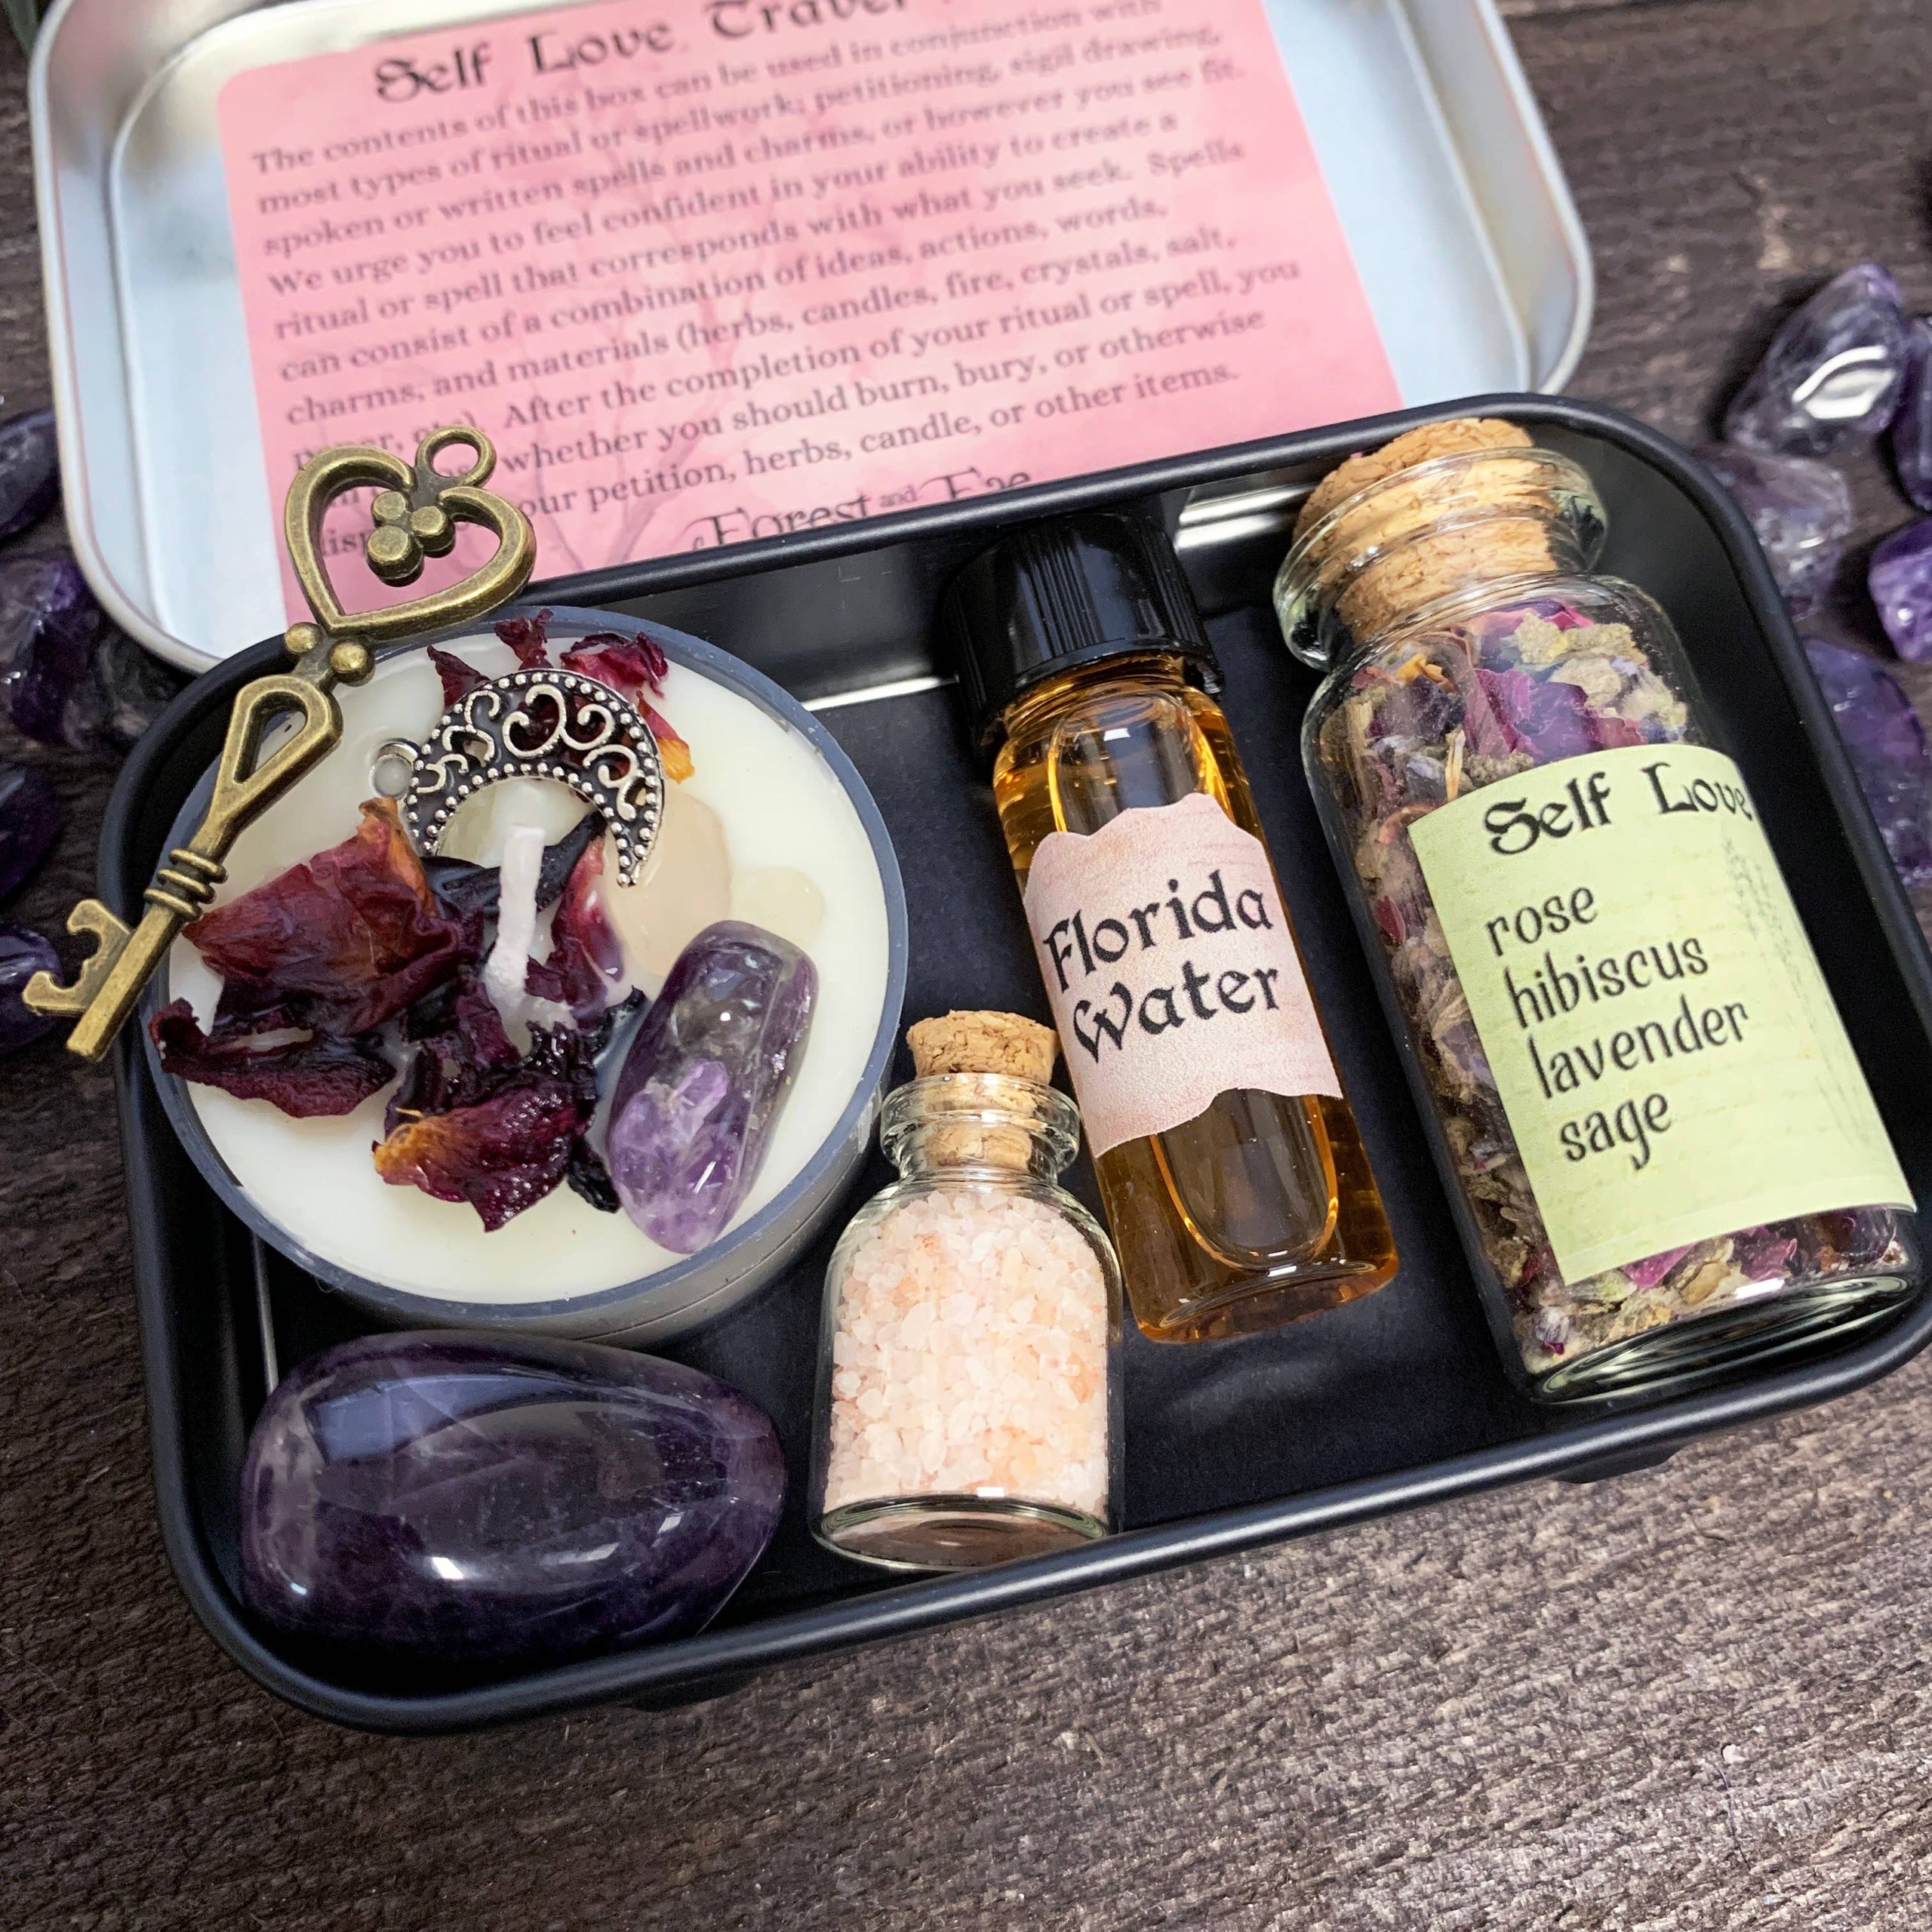 Self Love Travel Altar, Ritual Kit, Witch Kit, Witchcraft Mini Altar, Travel Spell Kit, Spell Candle, Herb Witch, Crystal Candle